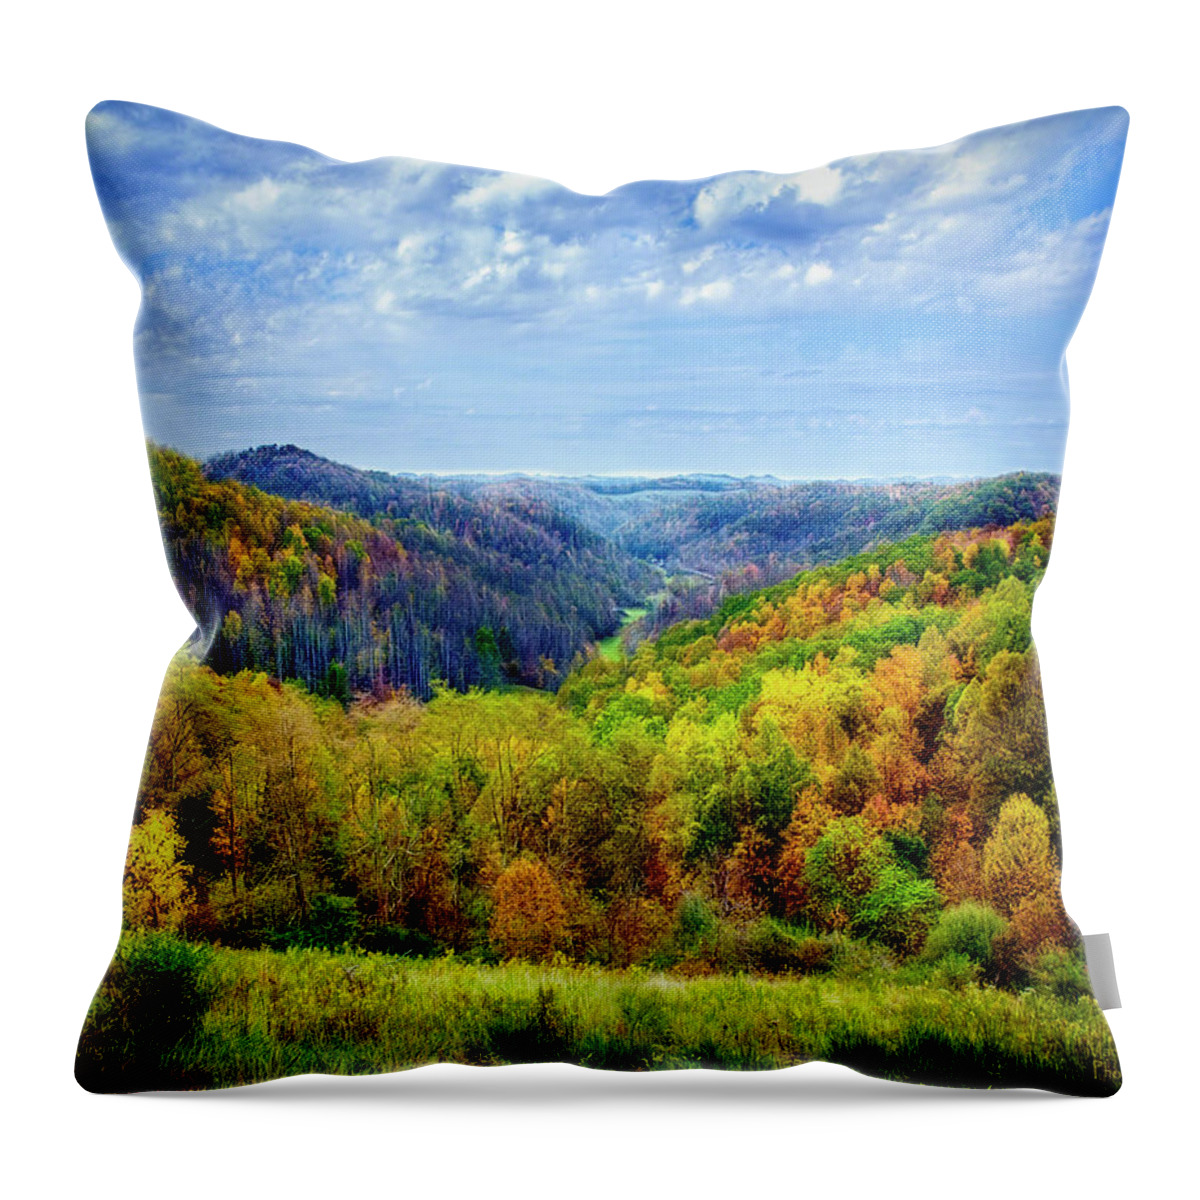 West Virginia Throw Pillow featuring the photograph West Virginia by Mark Allen